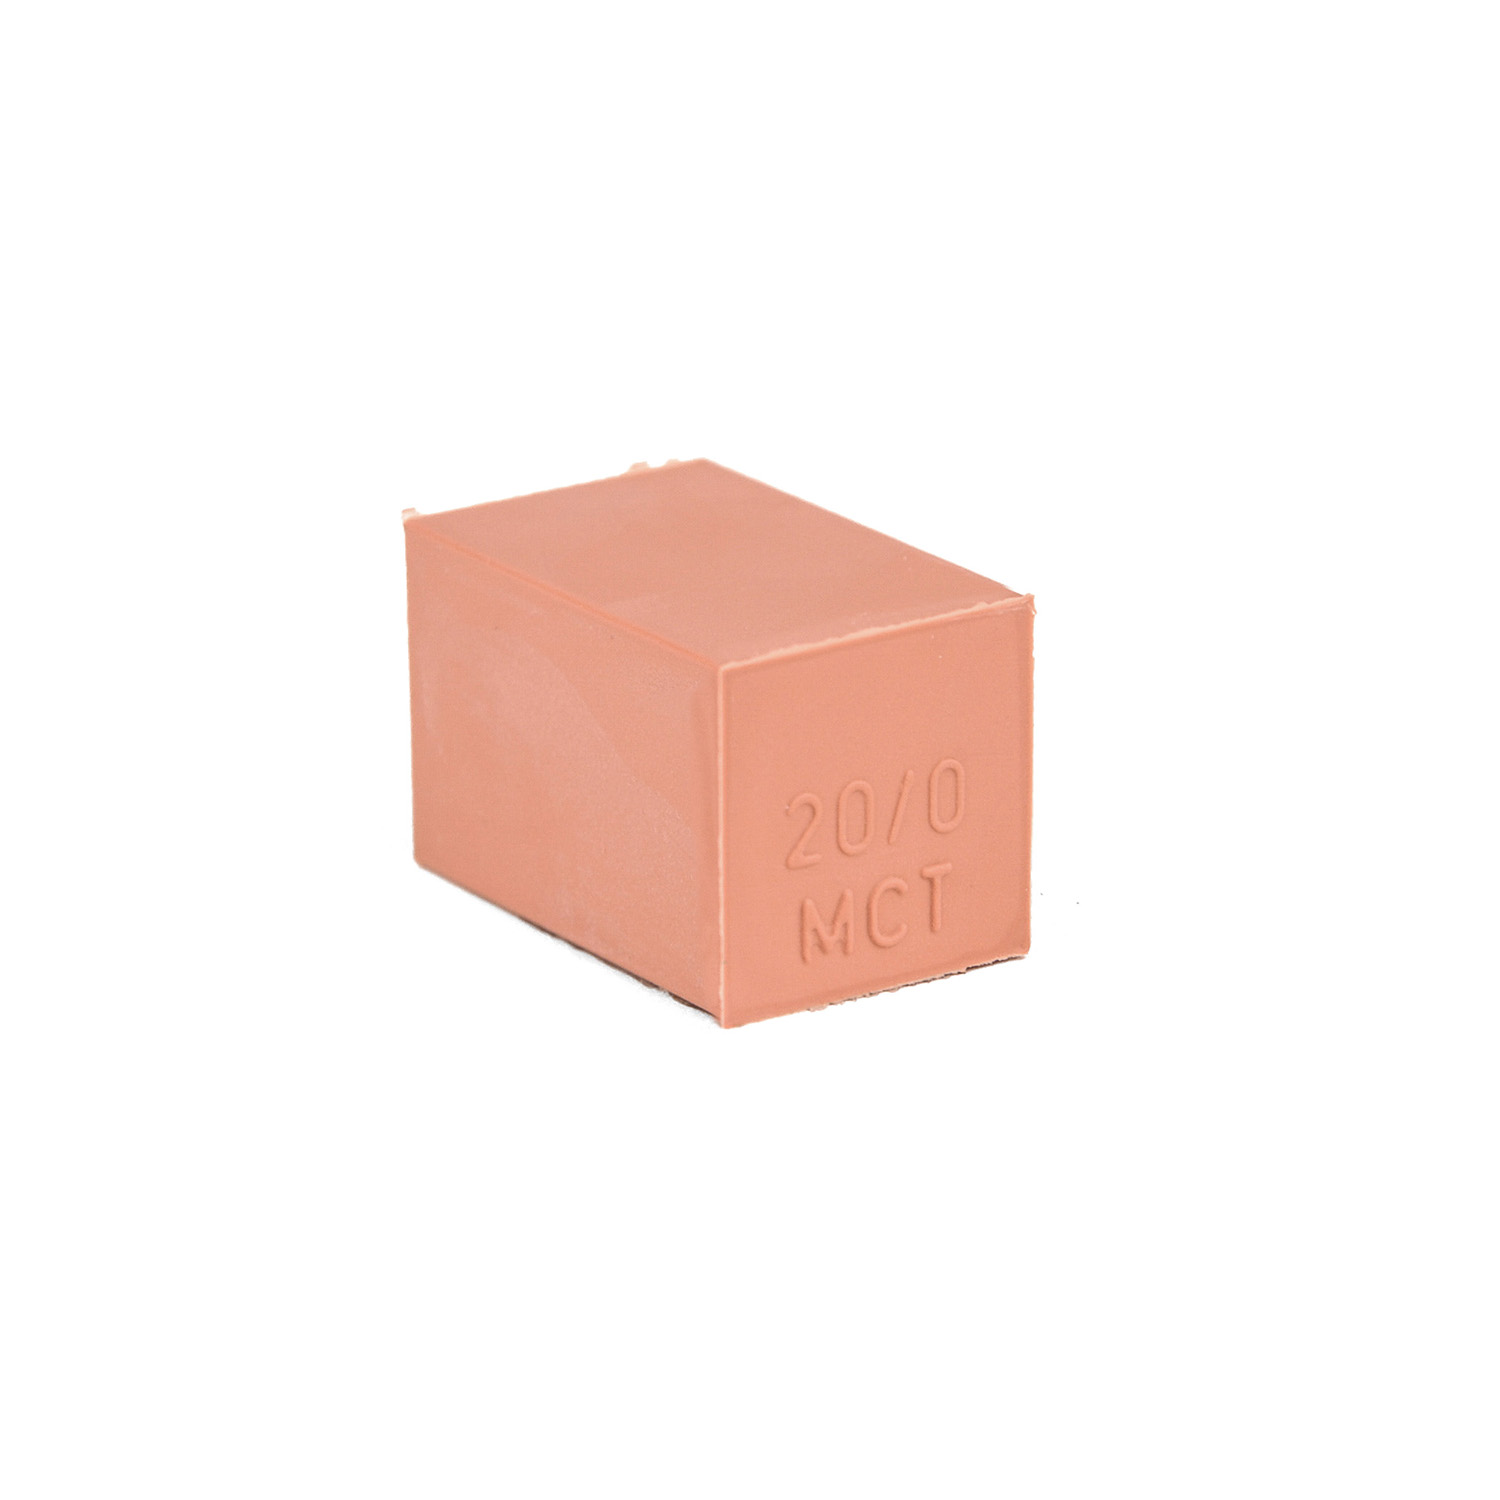 20-0 30MM Spare block lycron 30mm, 20-0 solid block size 20x20mm